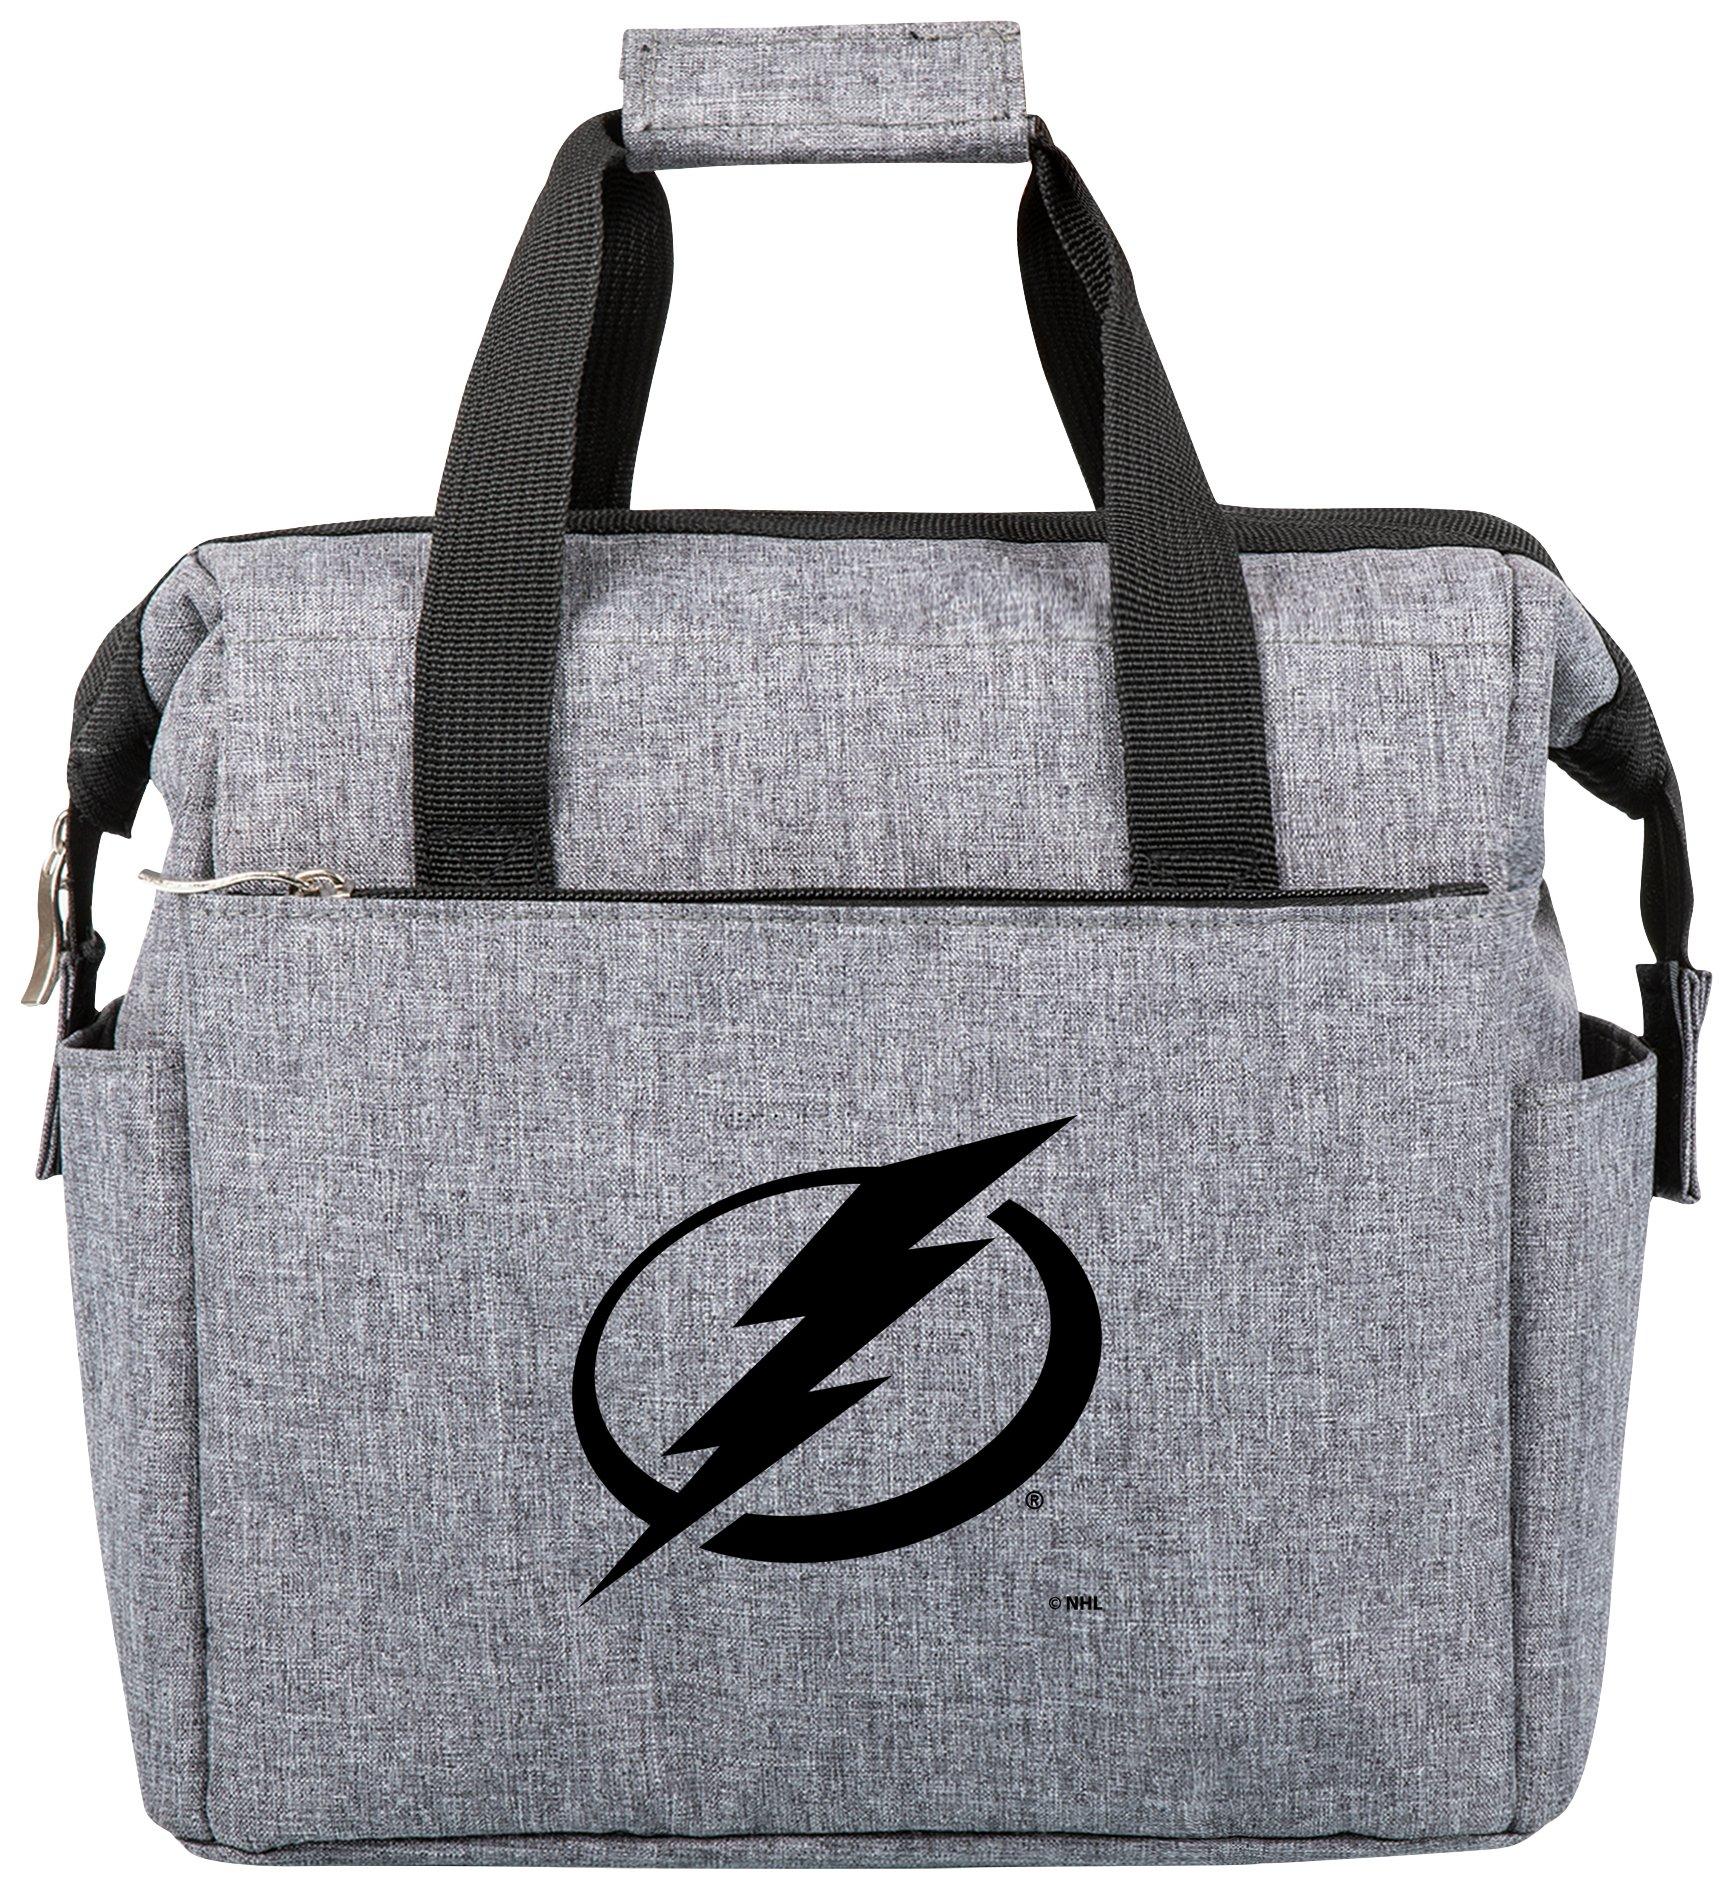 Tampa Bay Lightning On The Go Lunch Cooler